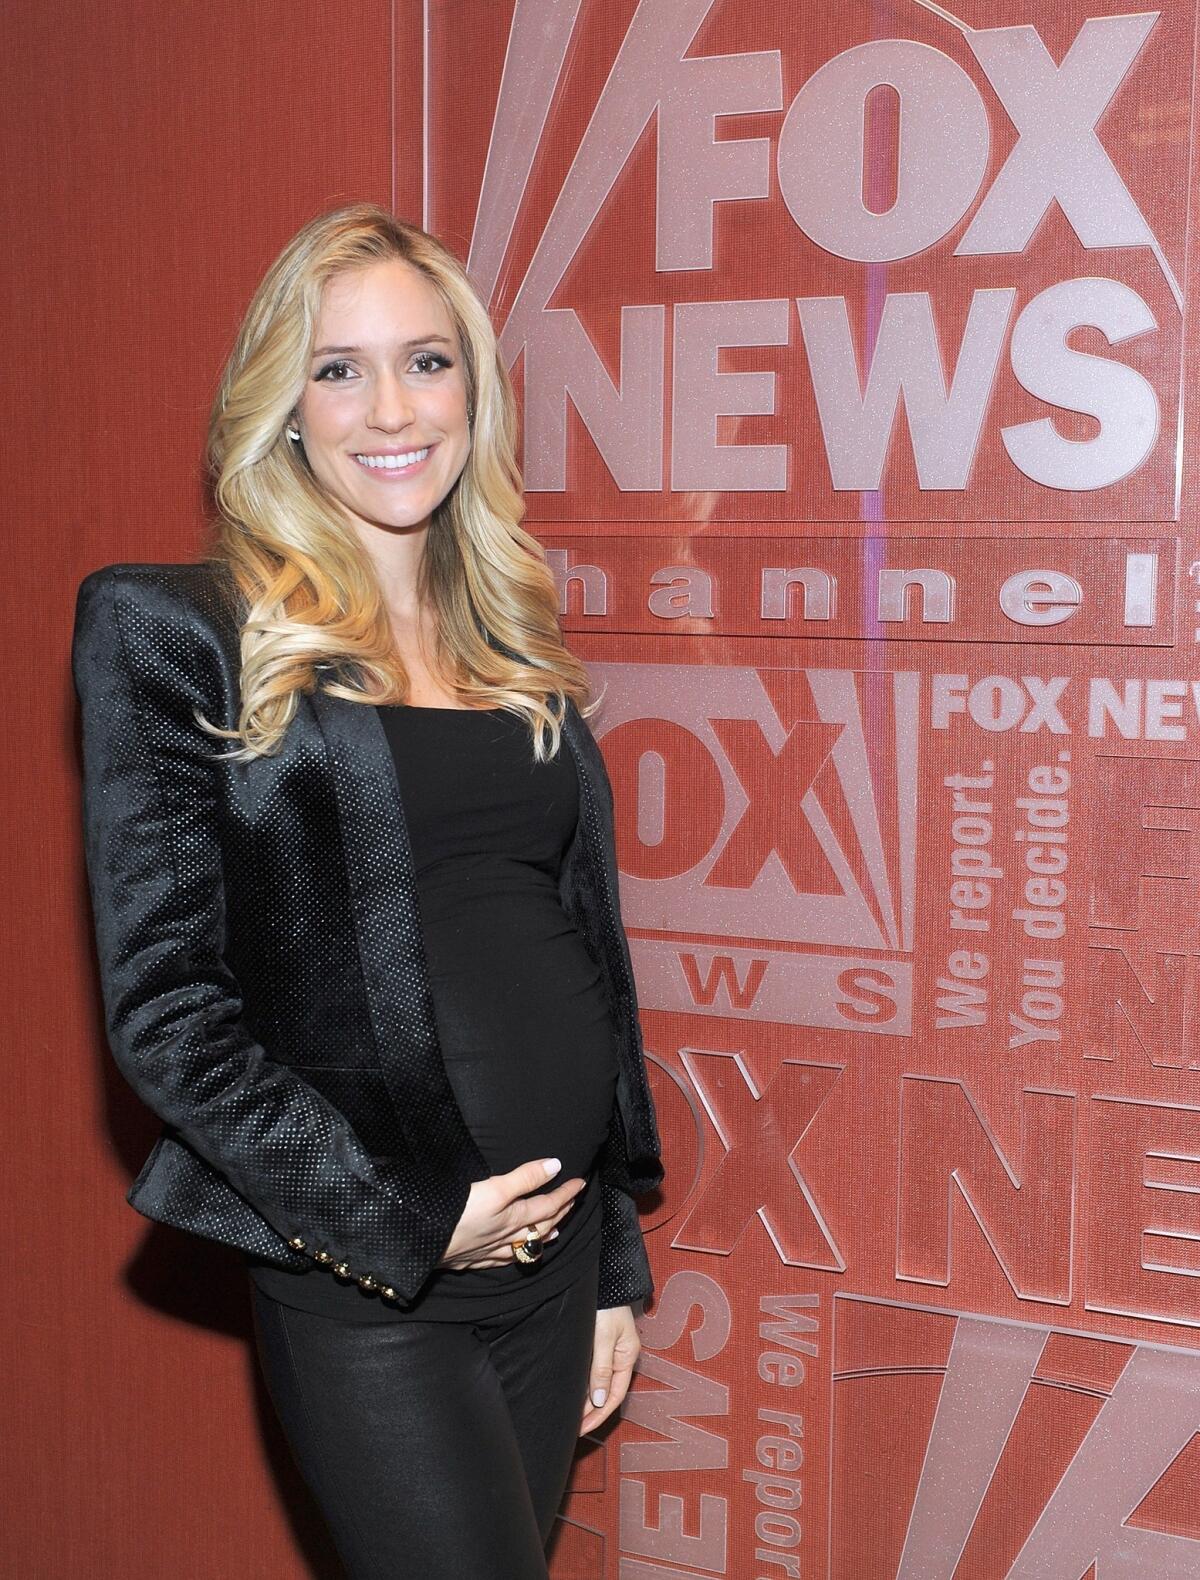 On a recent "FOX & Friends" segment, Kristin Cavallari defended her decision not to vaccinate her children, saying she's read too many books about autism.